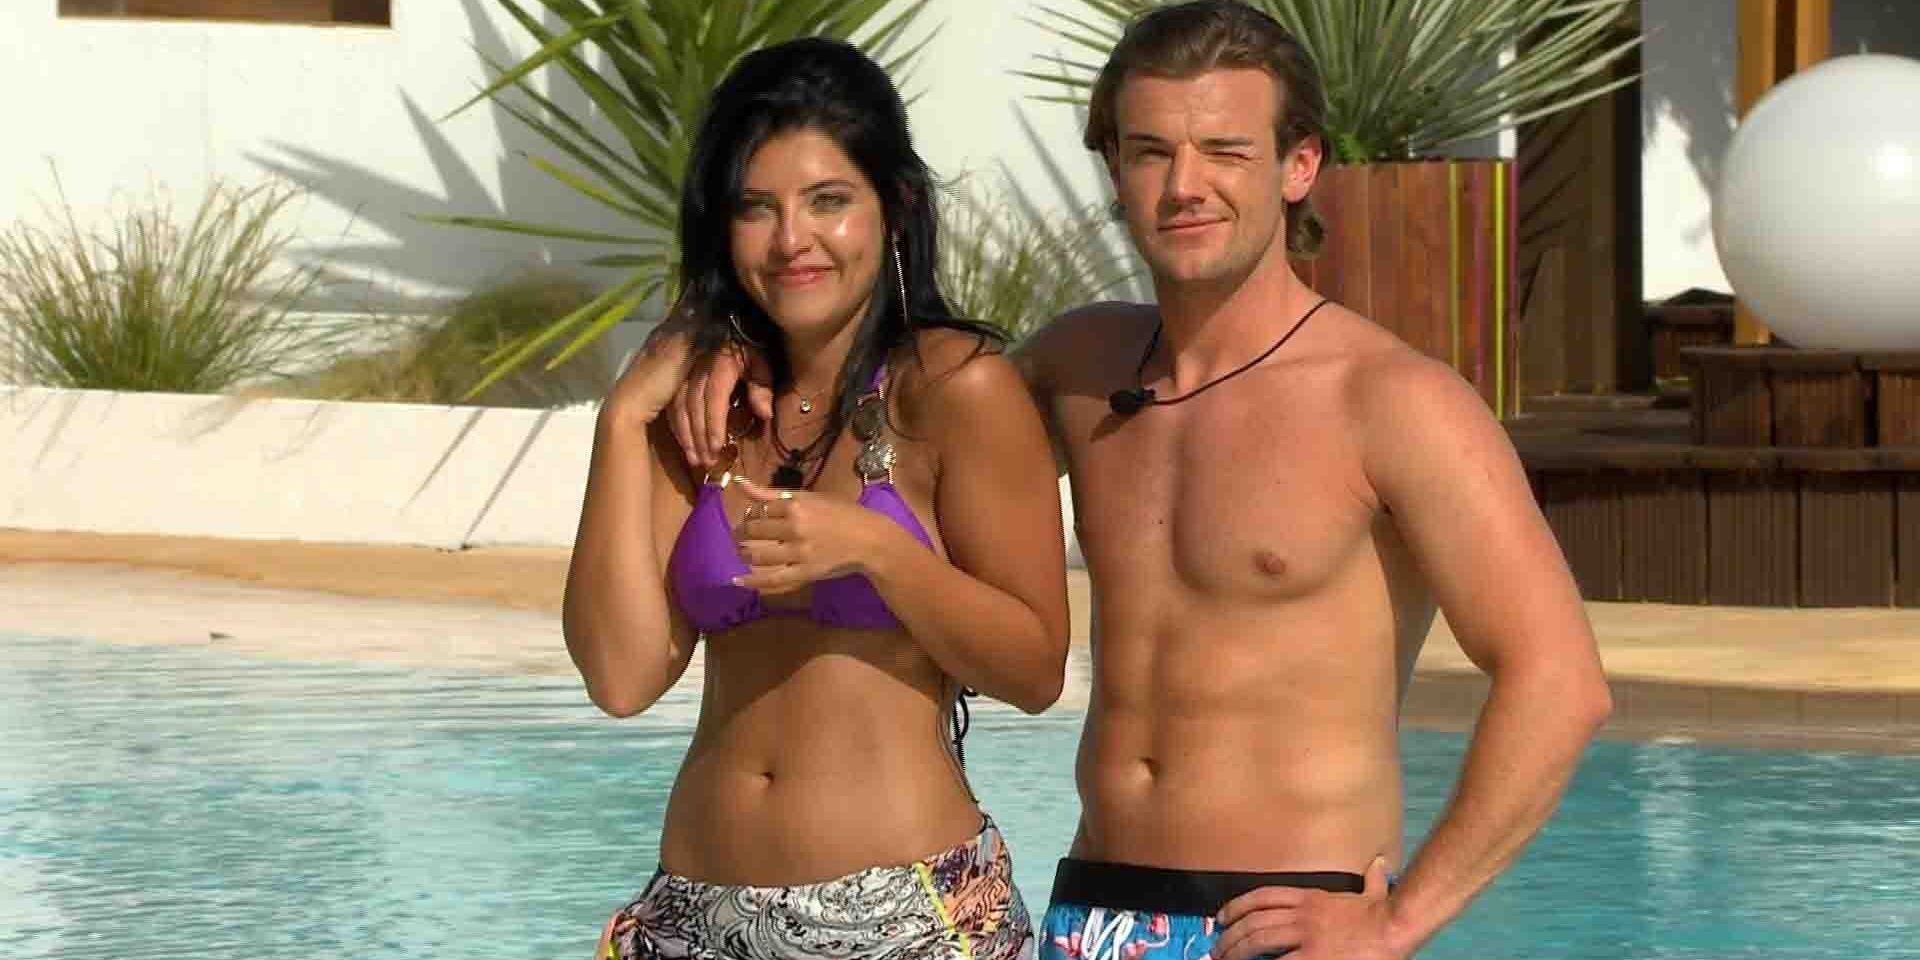 Cara and Nathan pose for a picture side by side in front the pool in Love Island UK season 2.